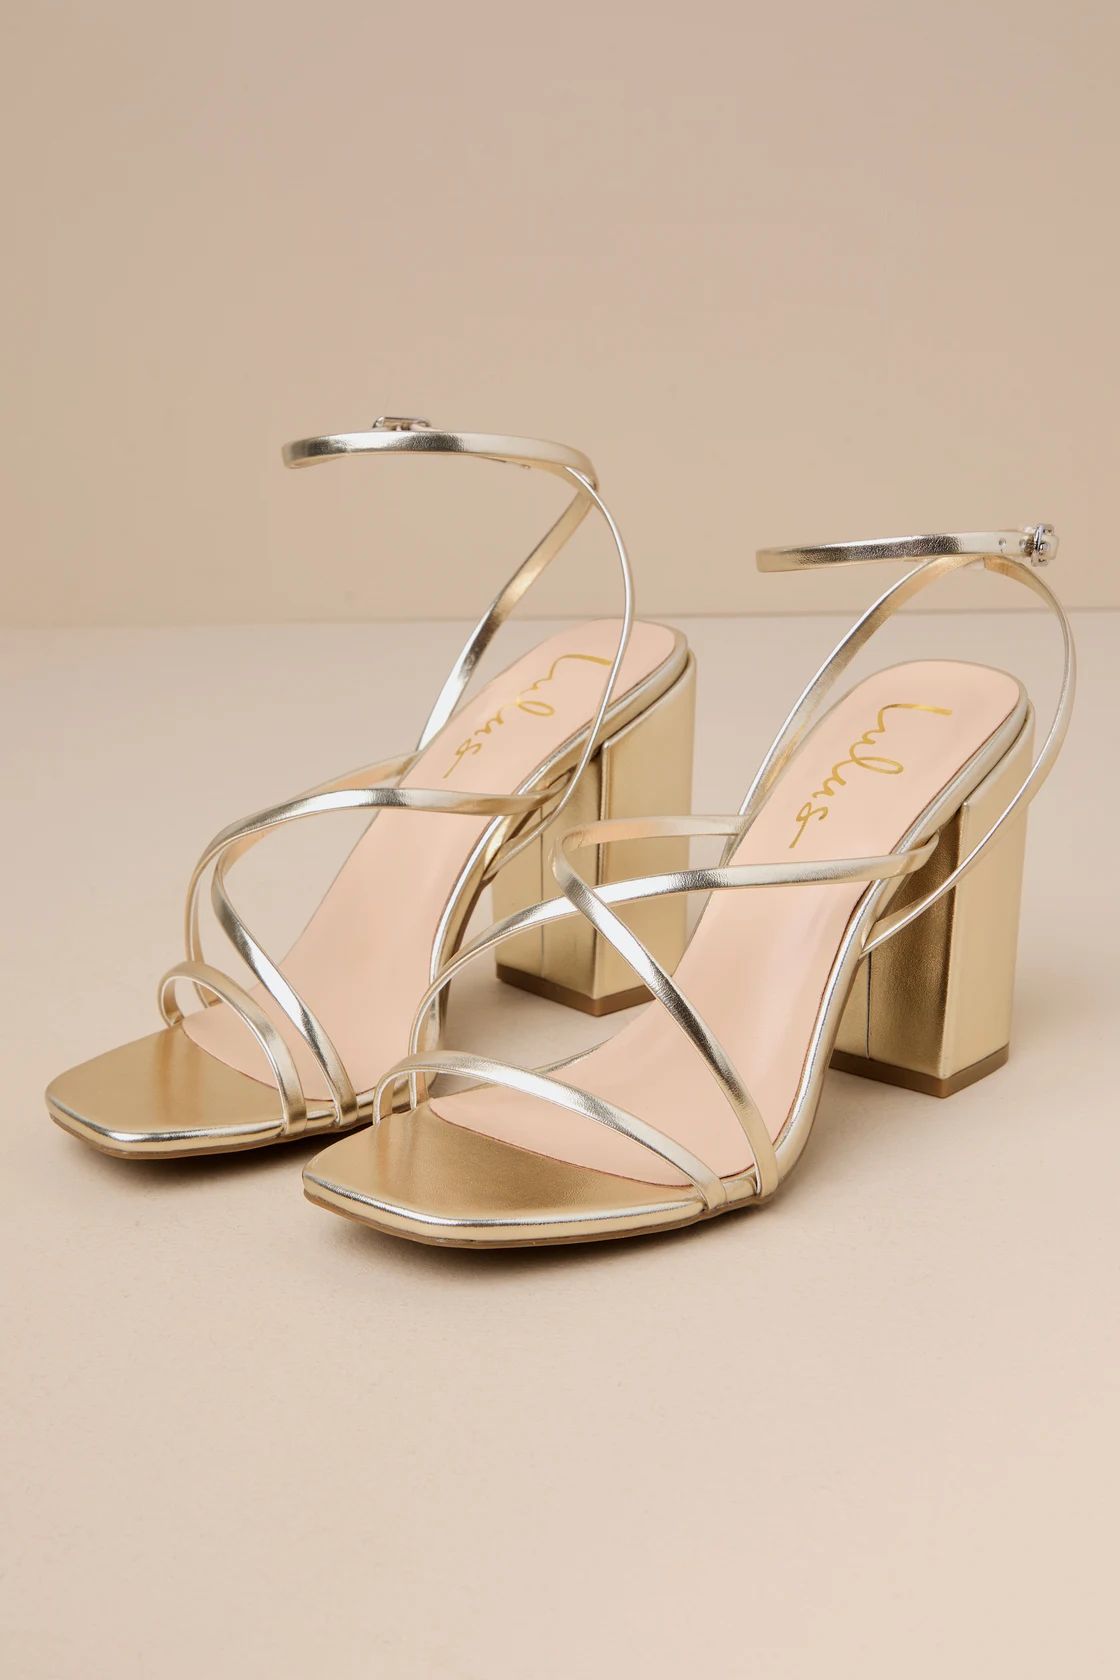 Munro Gold Strappy Ankle Strap High Heel Sandals | Lulus